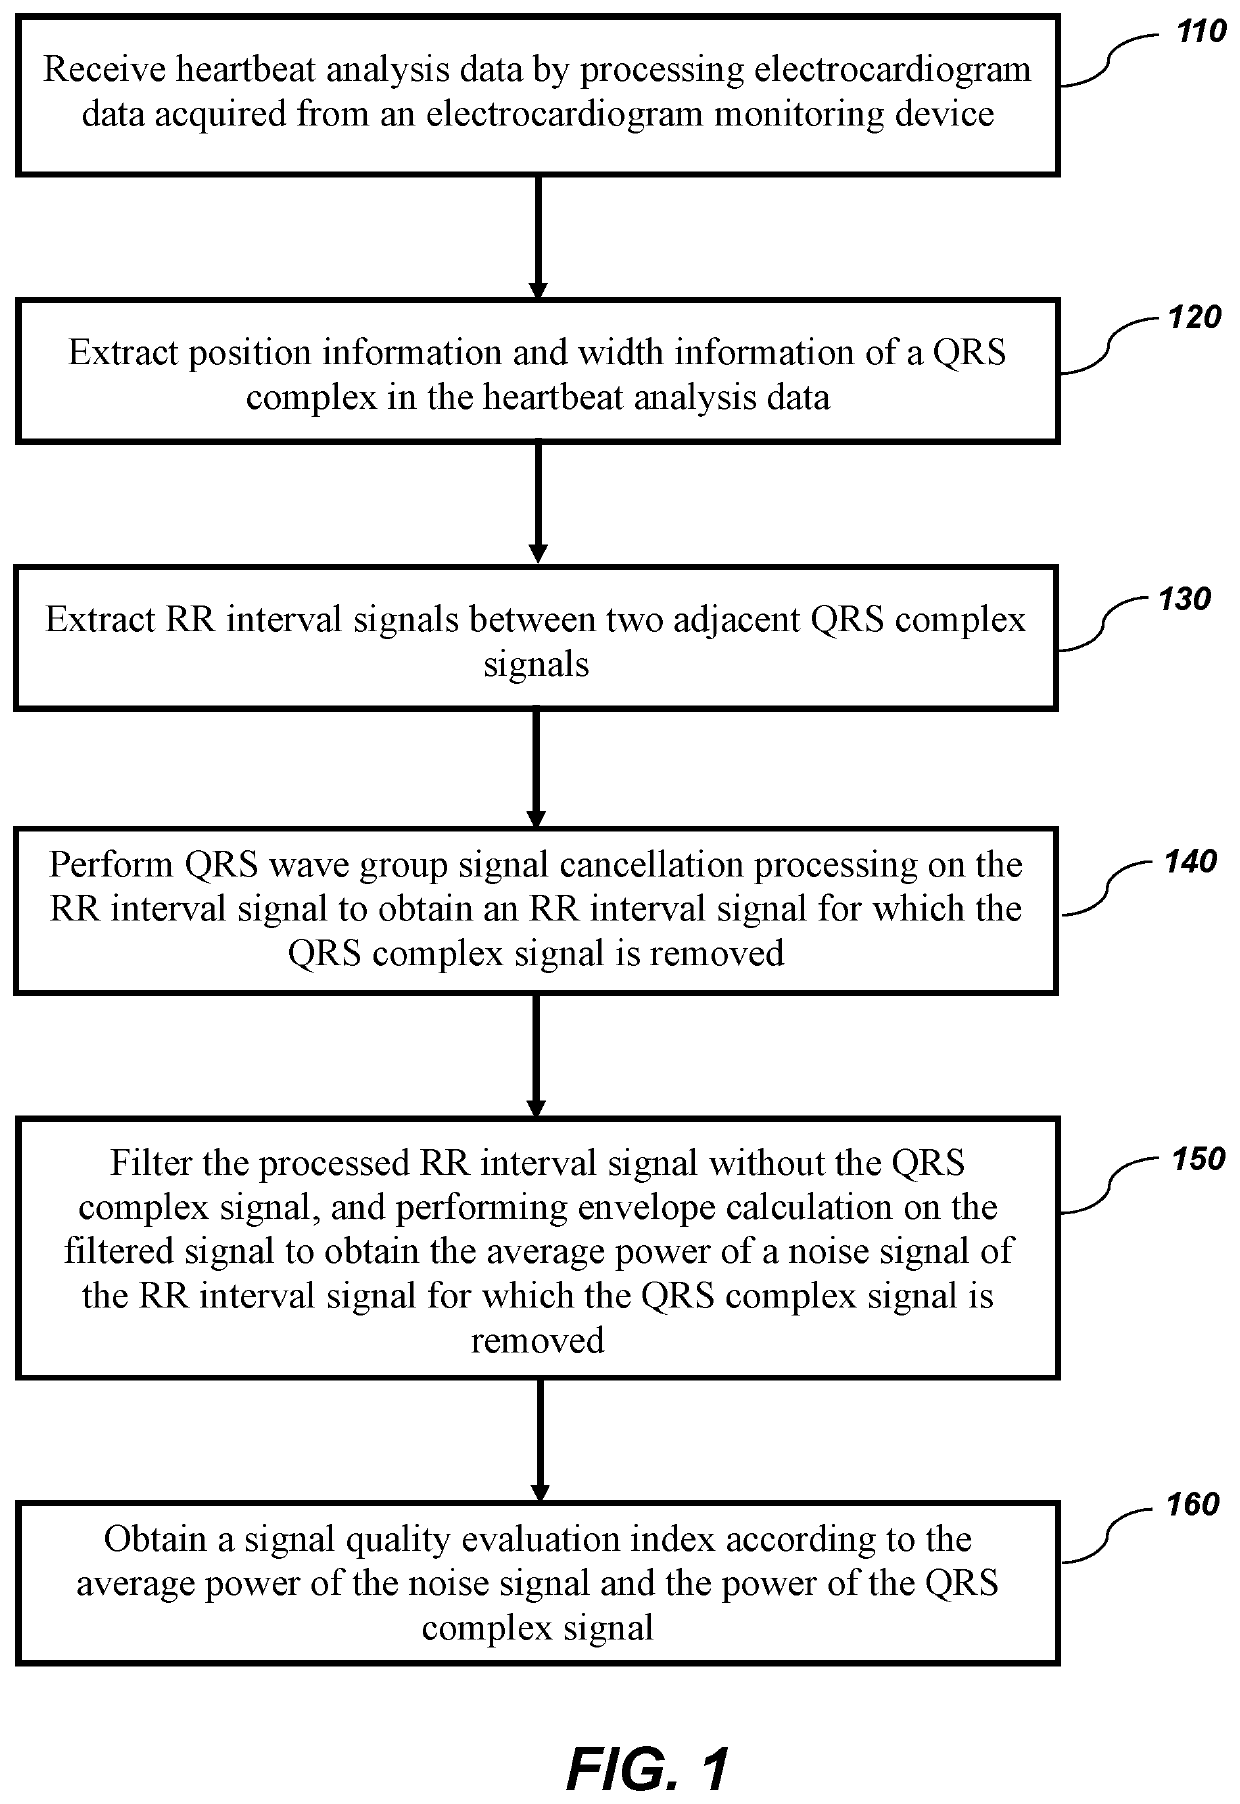 Method for assessing electrocardiogram signal quality